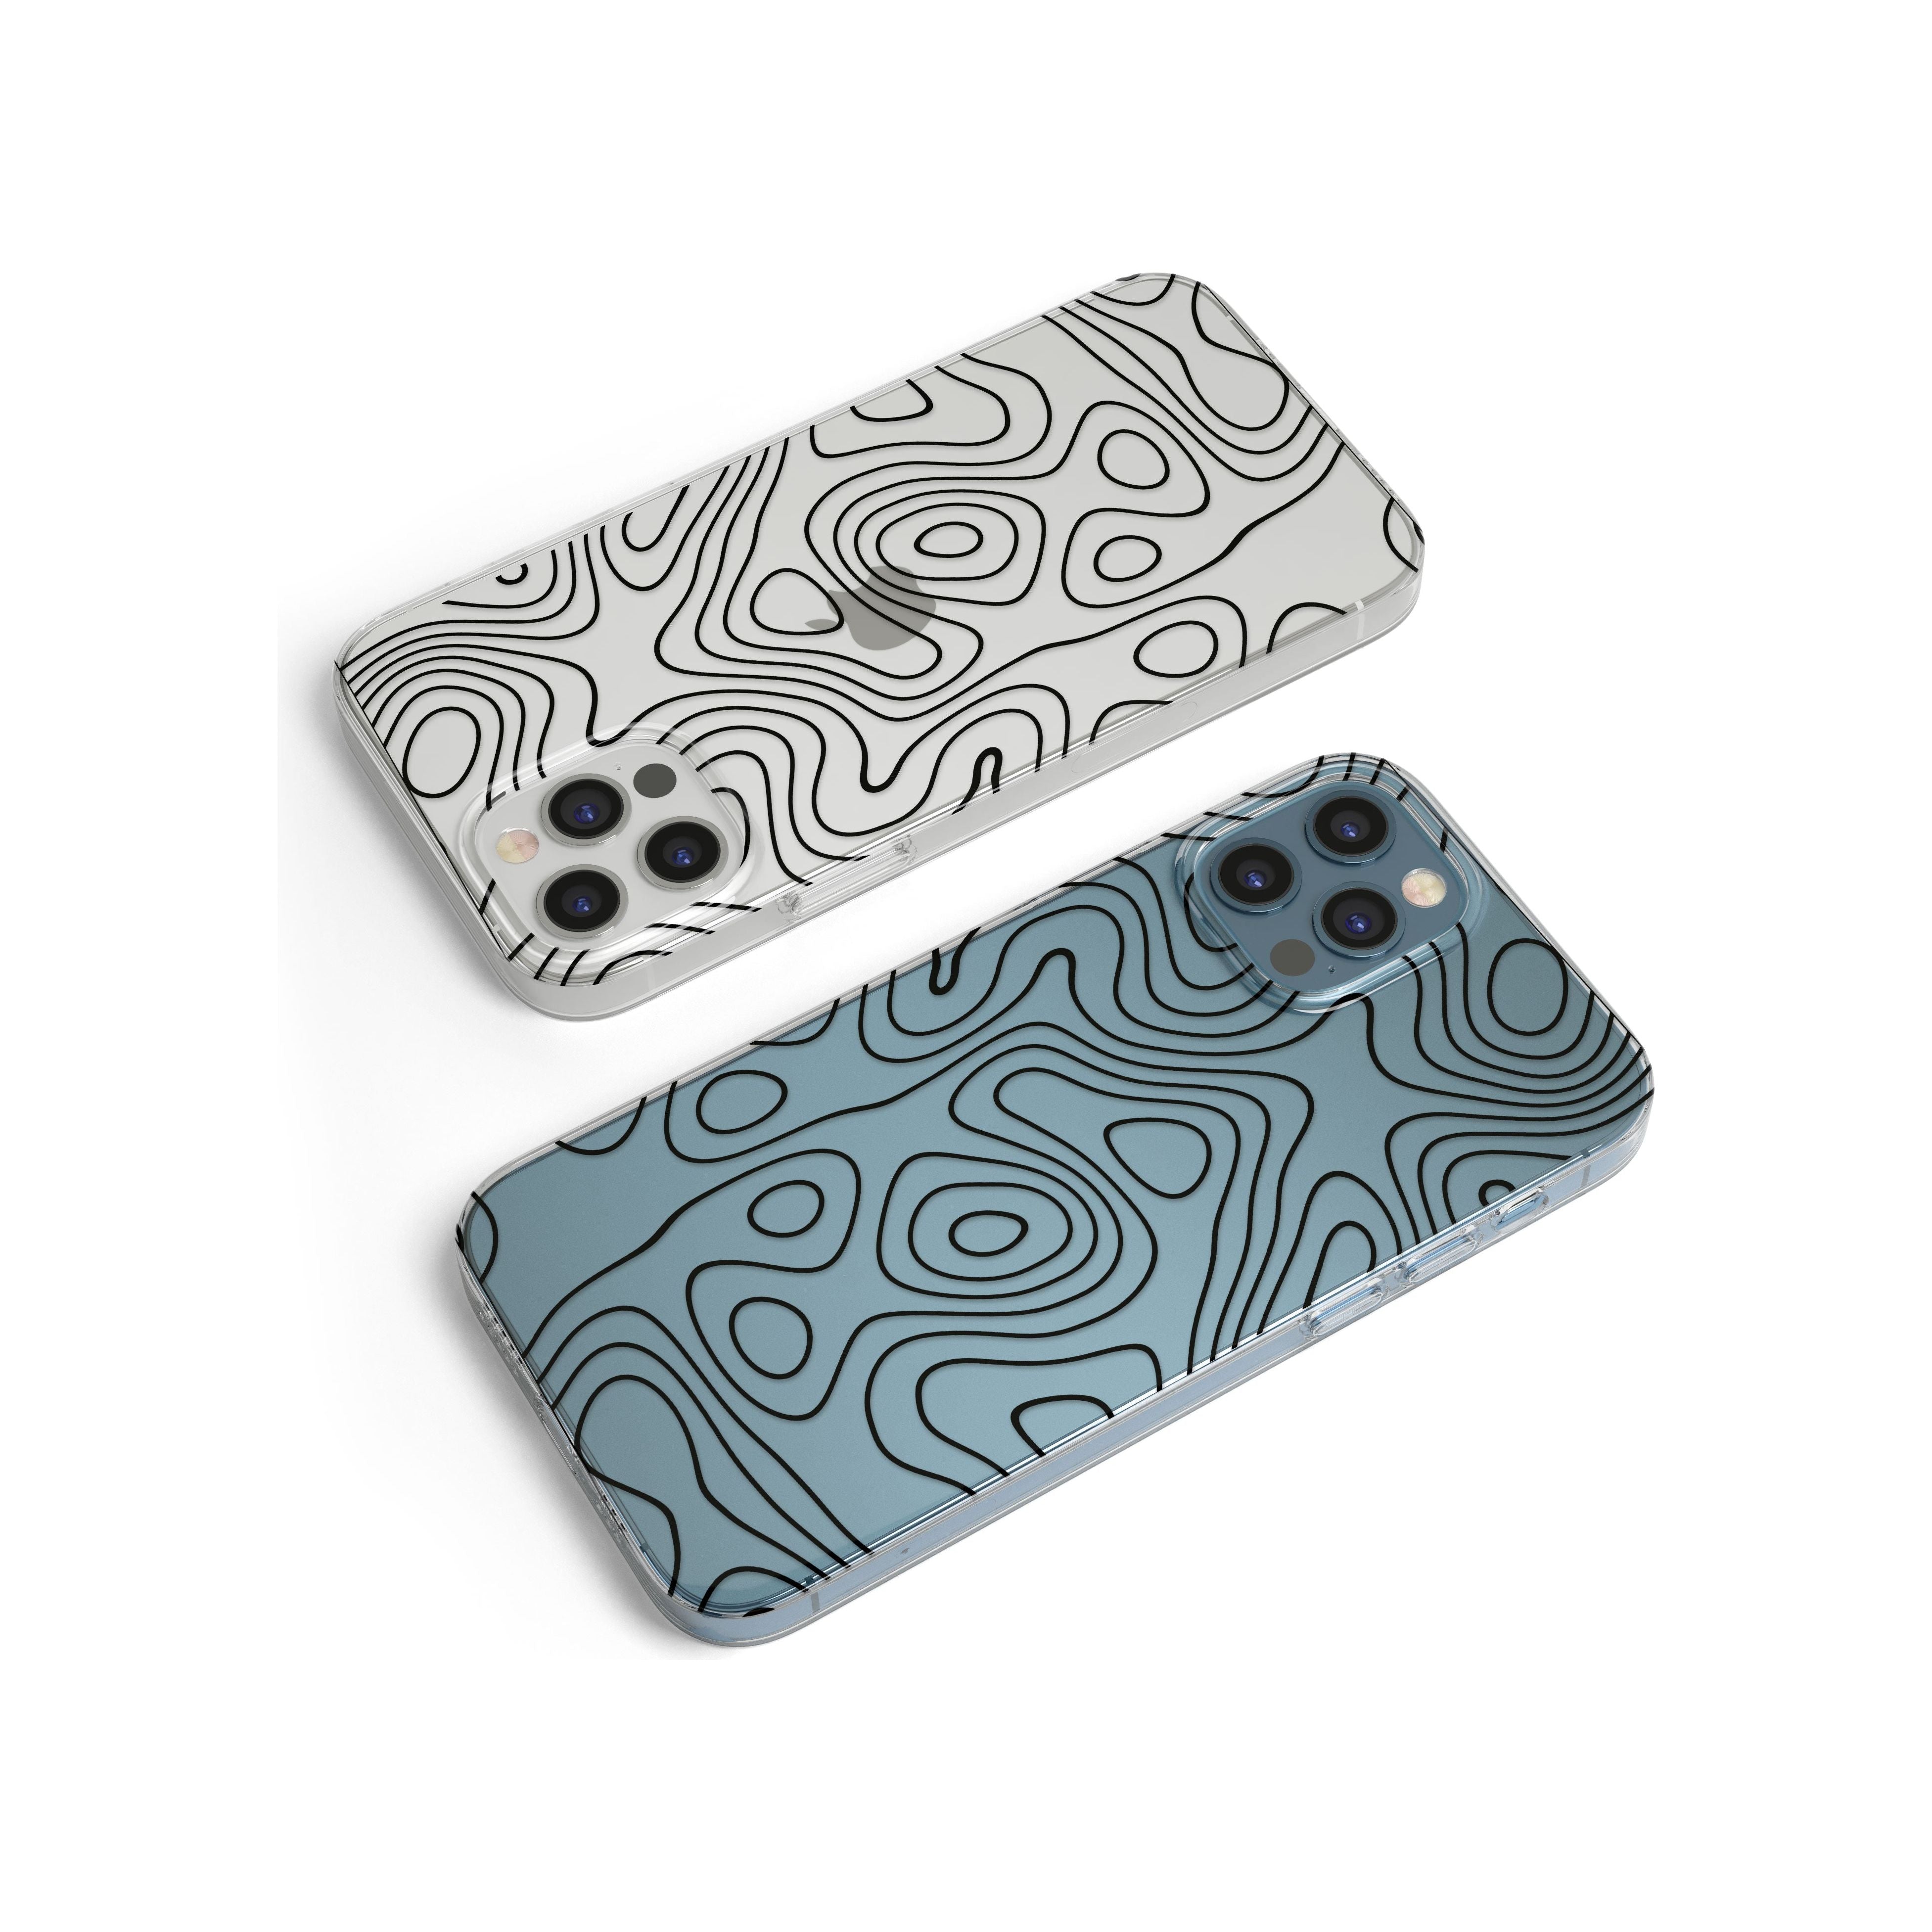 Damascus Steel Phone Case for iPhone 12 Pro